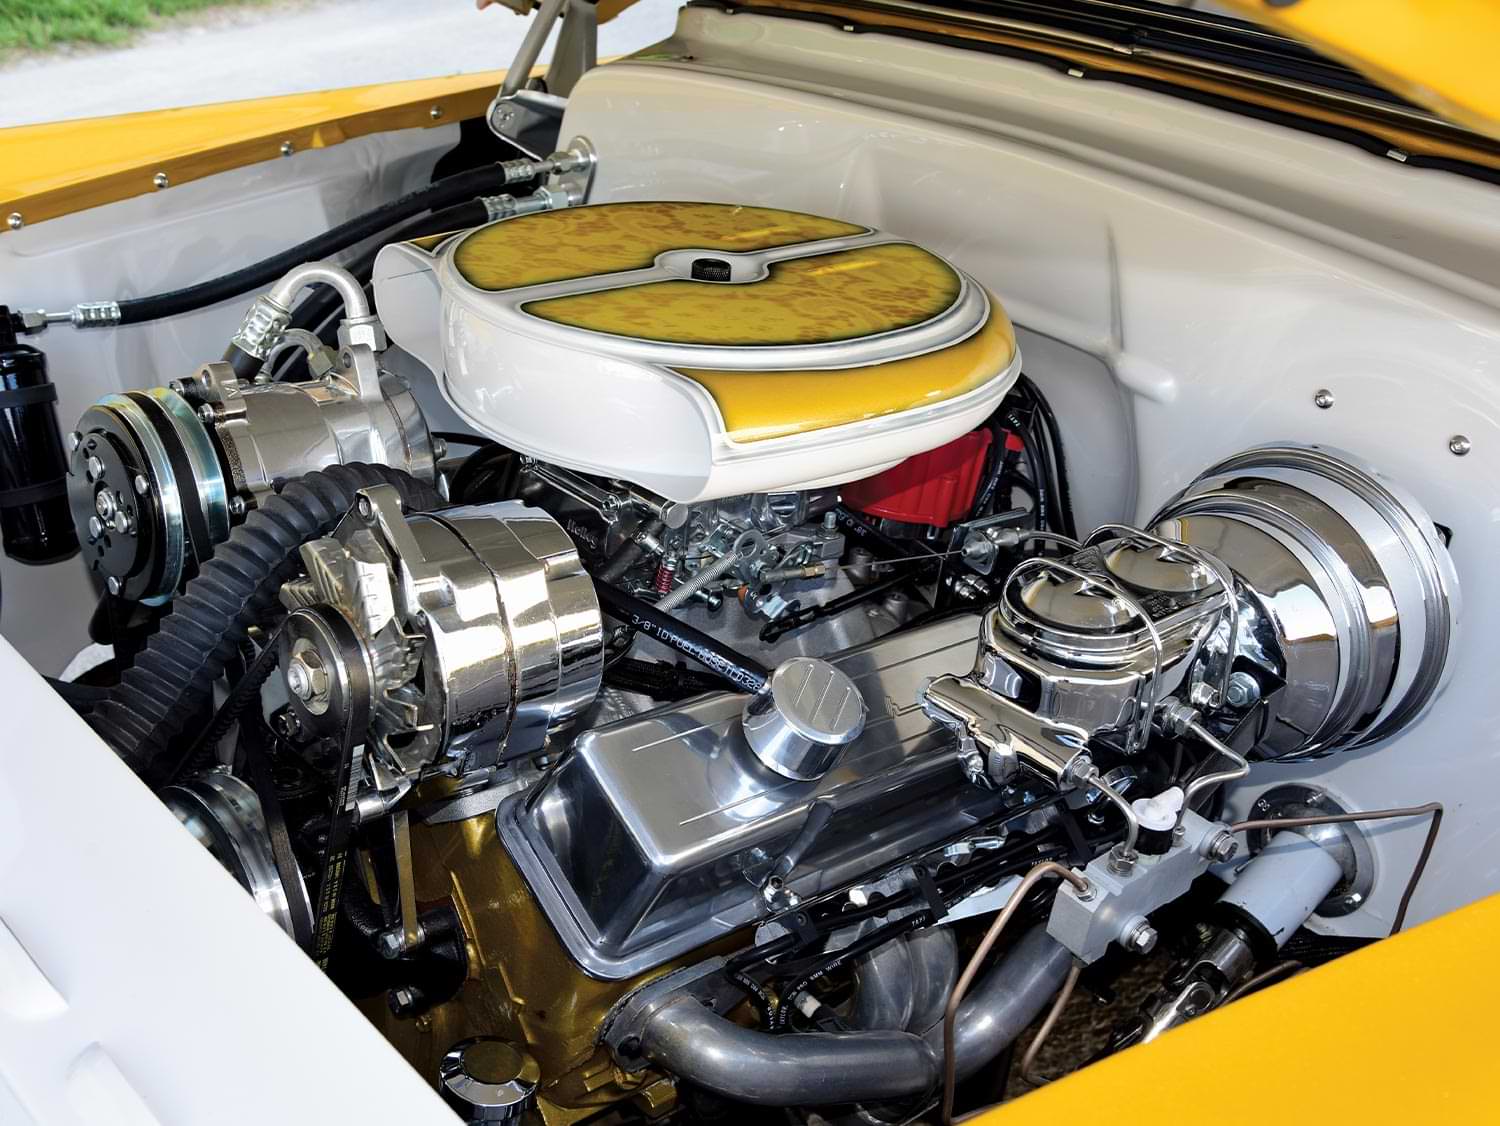 view of the custom ’54 Chevy Bel Air's engine styled with custom painted covers and components